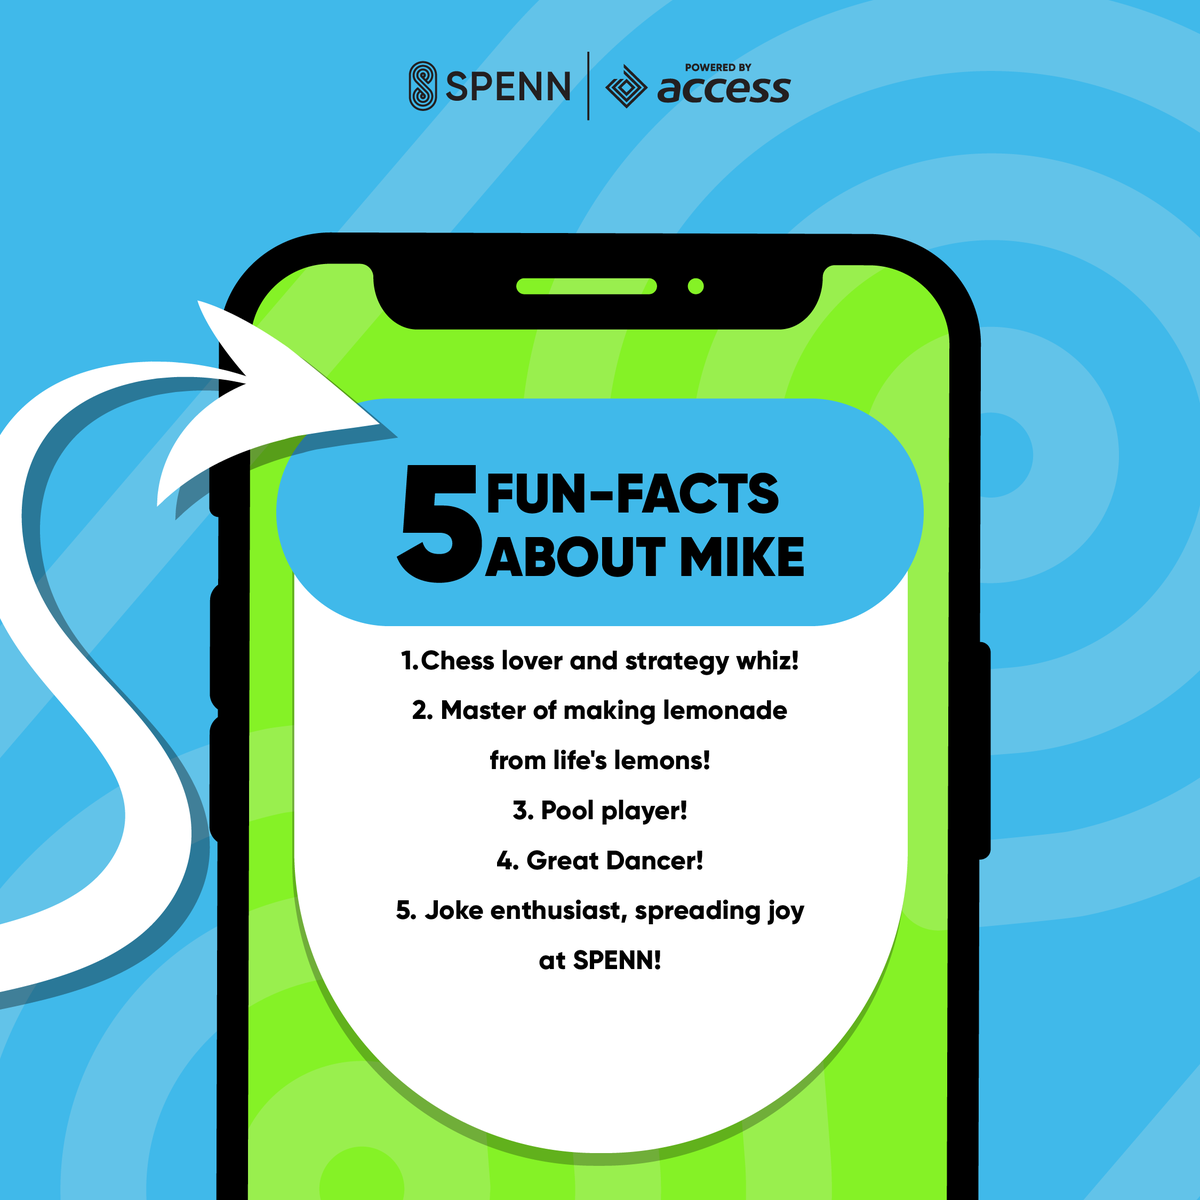 Meet the Faces Behind SPENN! Introducing our talented team and their roles. Get to know the individuals who work tirelessly to bring you the best financial solutions. This week say hello to Mike! #MeetTheTeam #SPENNTeam #FinancialExperts #Collaboration #BehindTheScenes